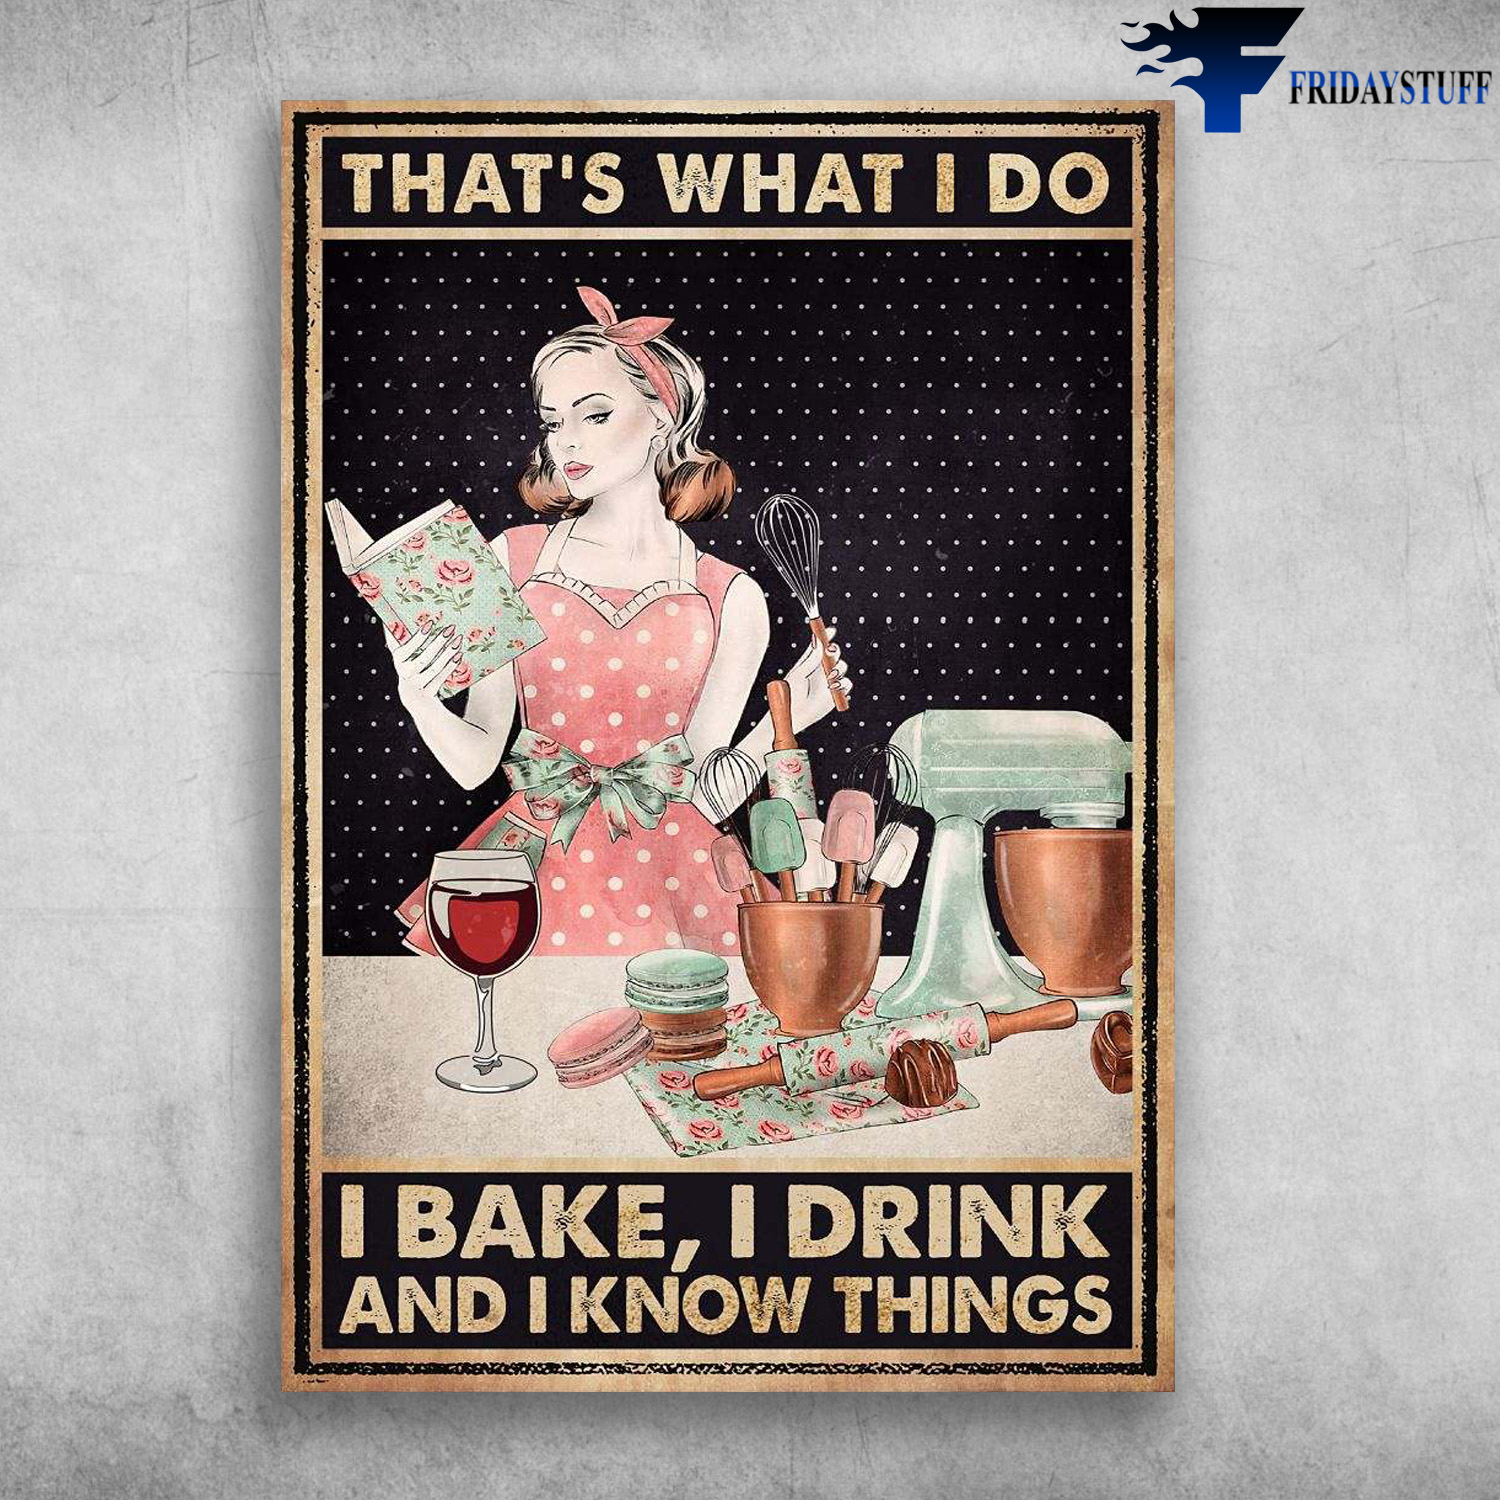 Girl Baking, Bake And Drink - That's What I Do, I Bake, I Drink, And I Know Things